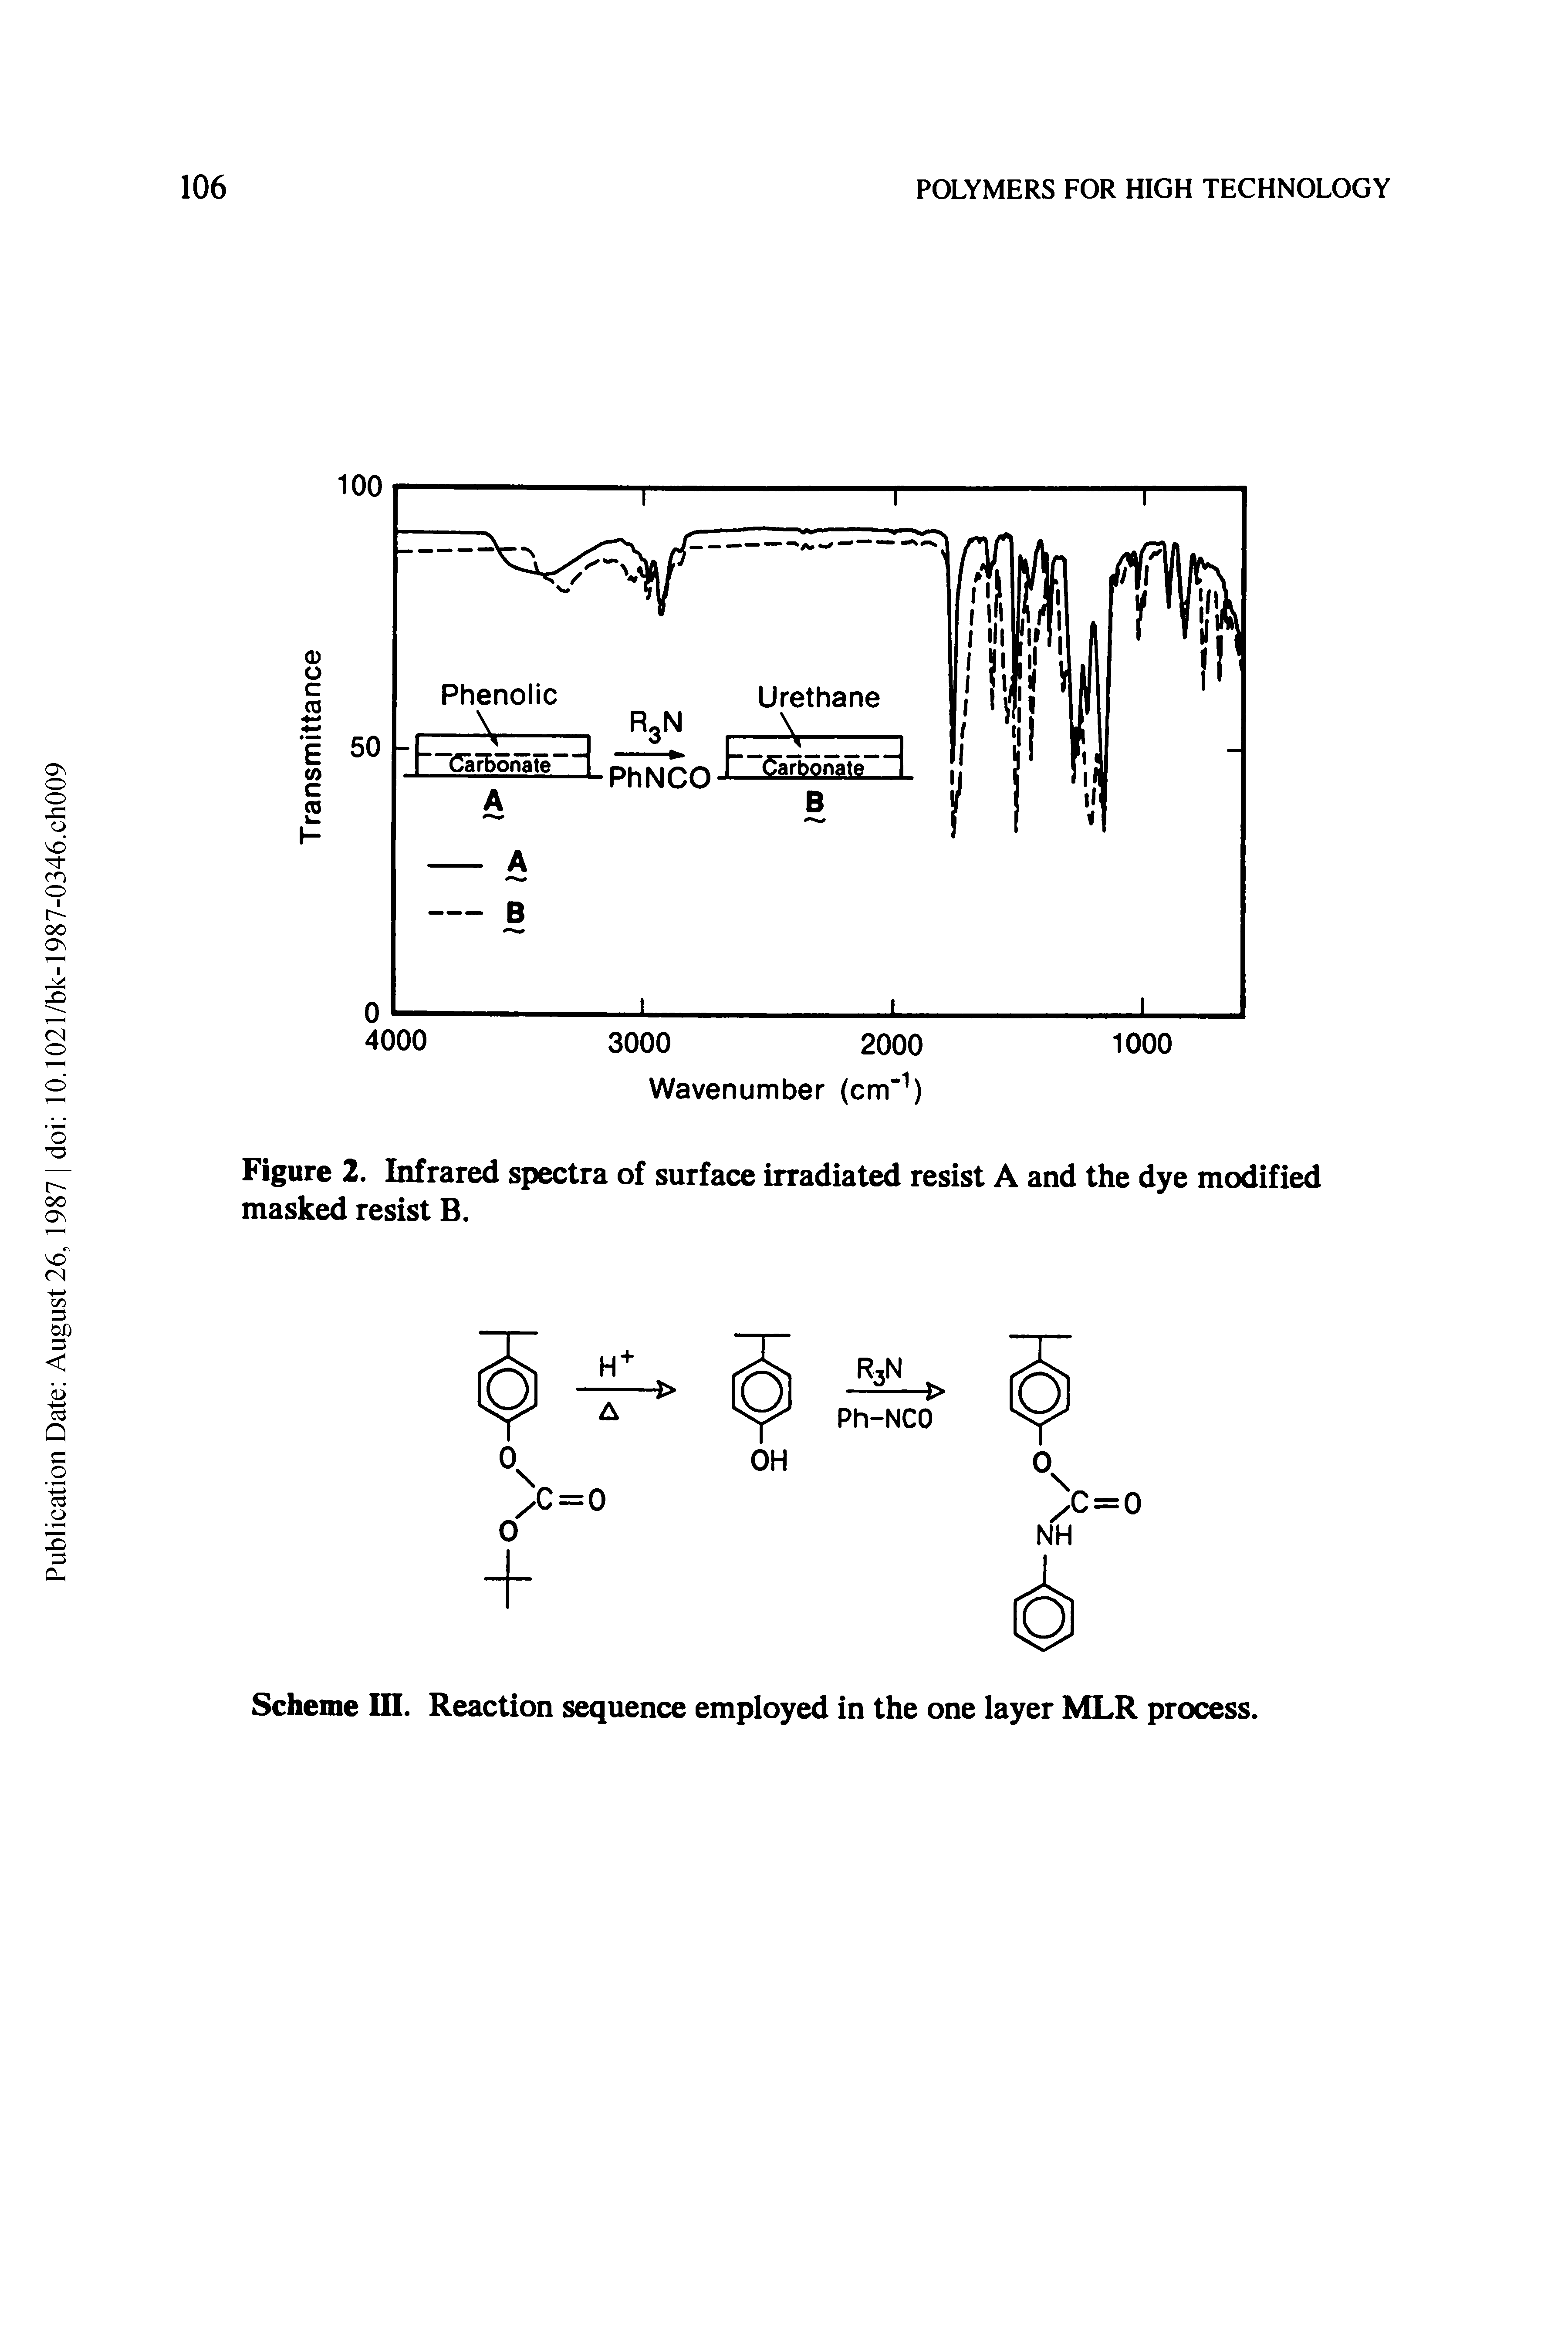 Figure 2. Infrared spectra of surface irradiated resist A and the dye modified masked resist B.